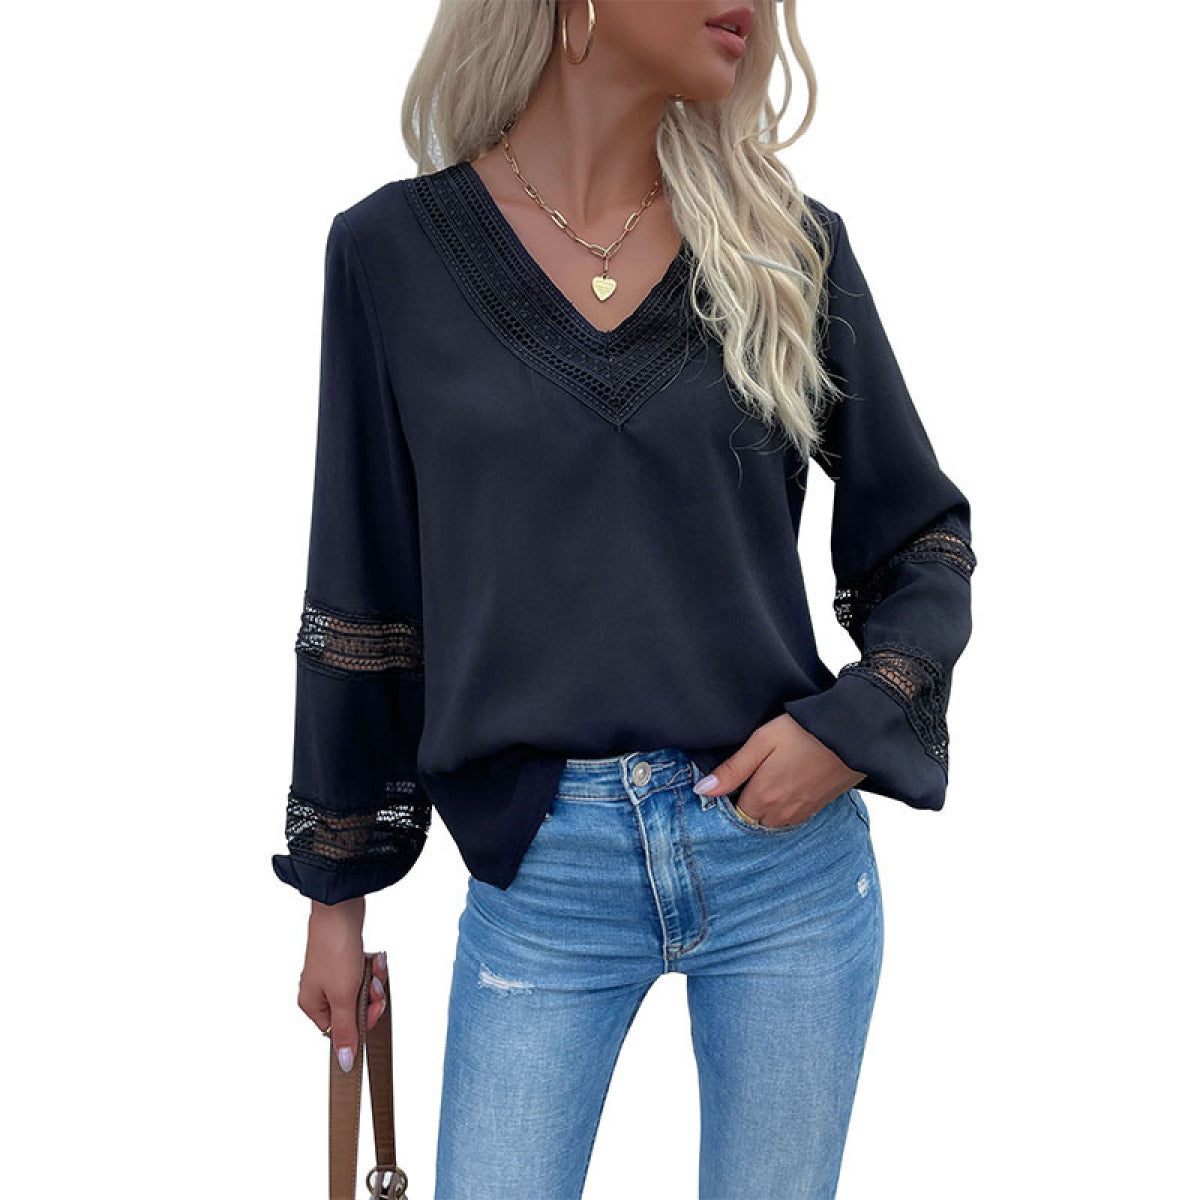 Embroidered V-Neck Lantern Cut Out Sleeve Blouse